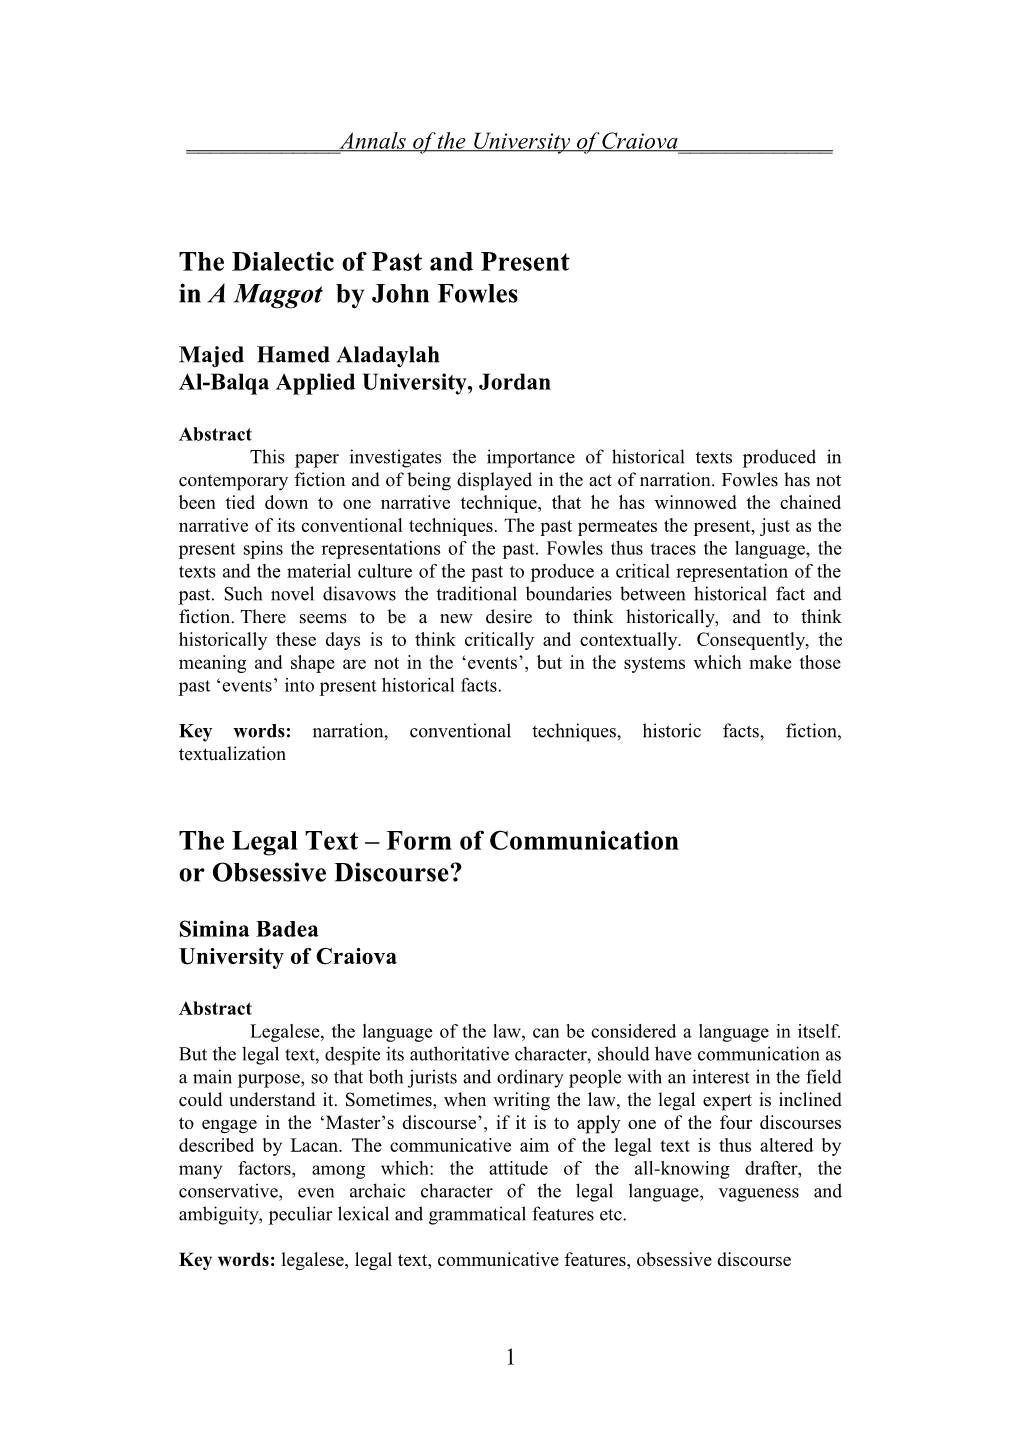 The Legal Text Form of Communication Or Obsessive Discourse